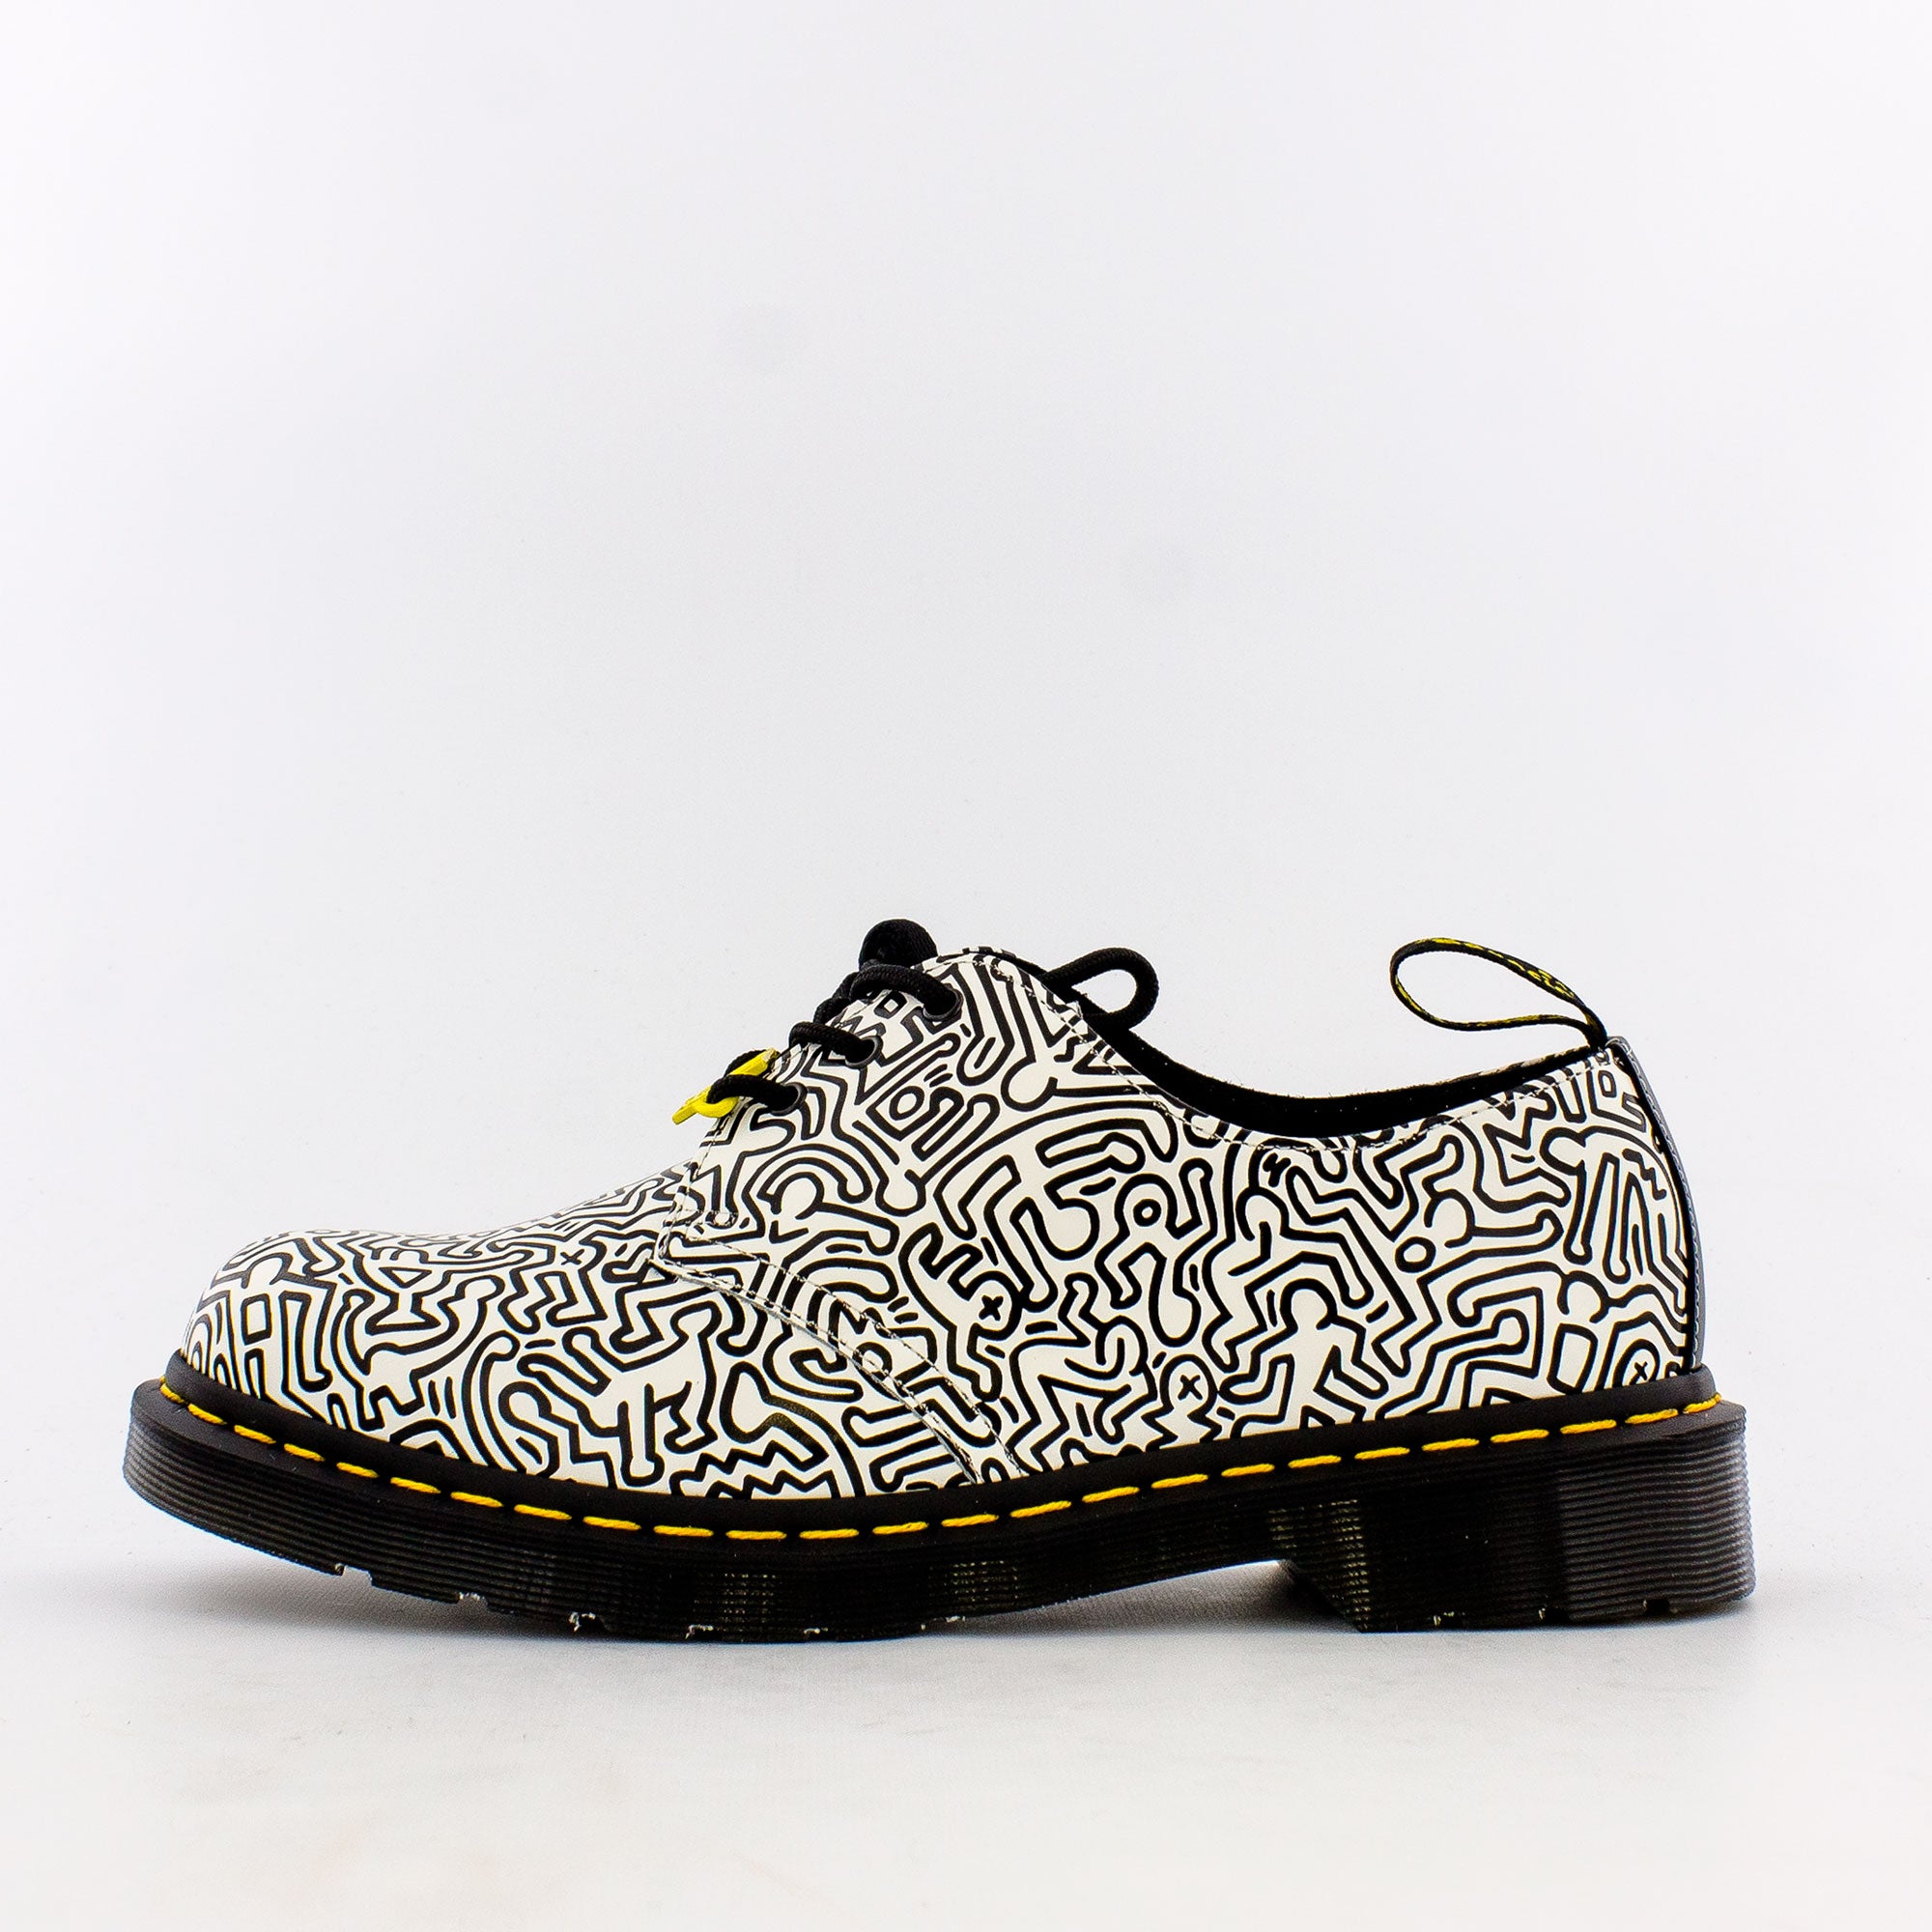 Dr. Martens Keith Haring 1461